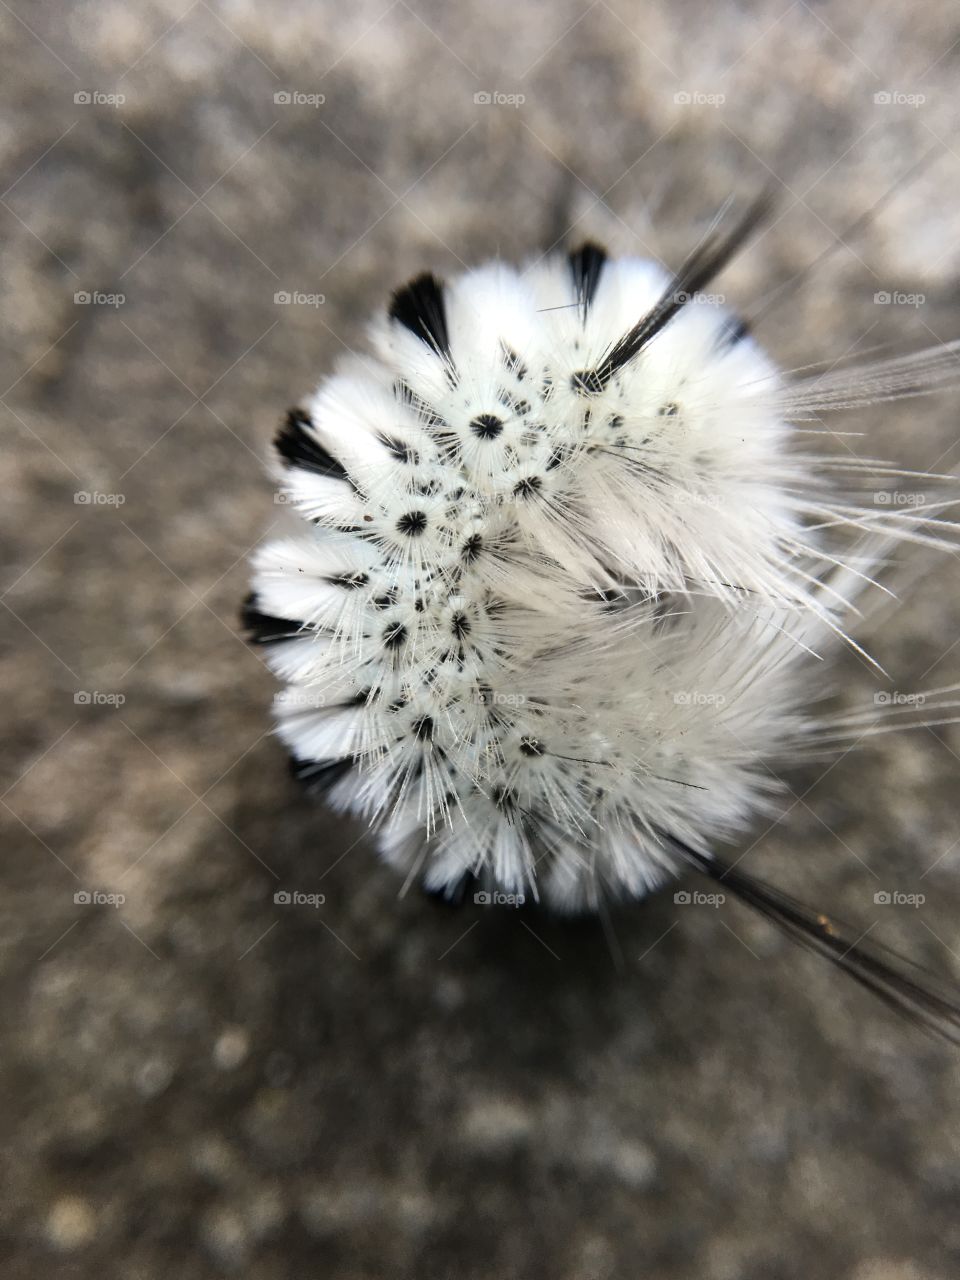 Black and white caterpillar with feather like hair closeup detail macro of the poisonous  "Hickory Tussock Moth Caterpillar" 